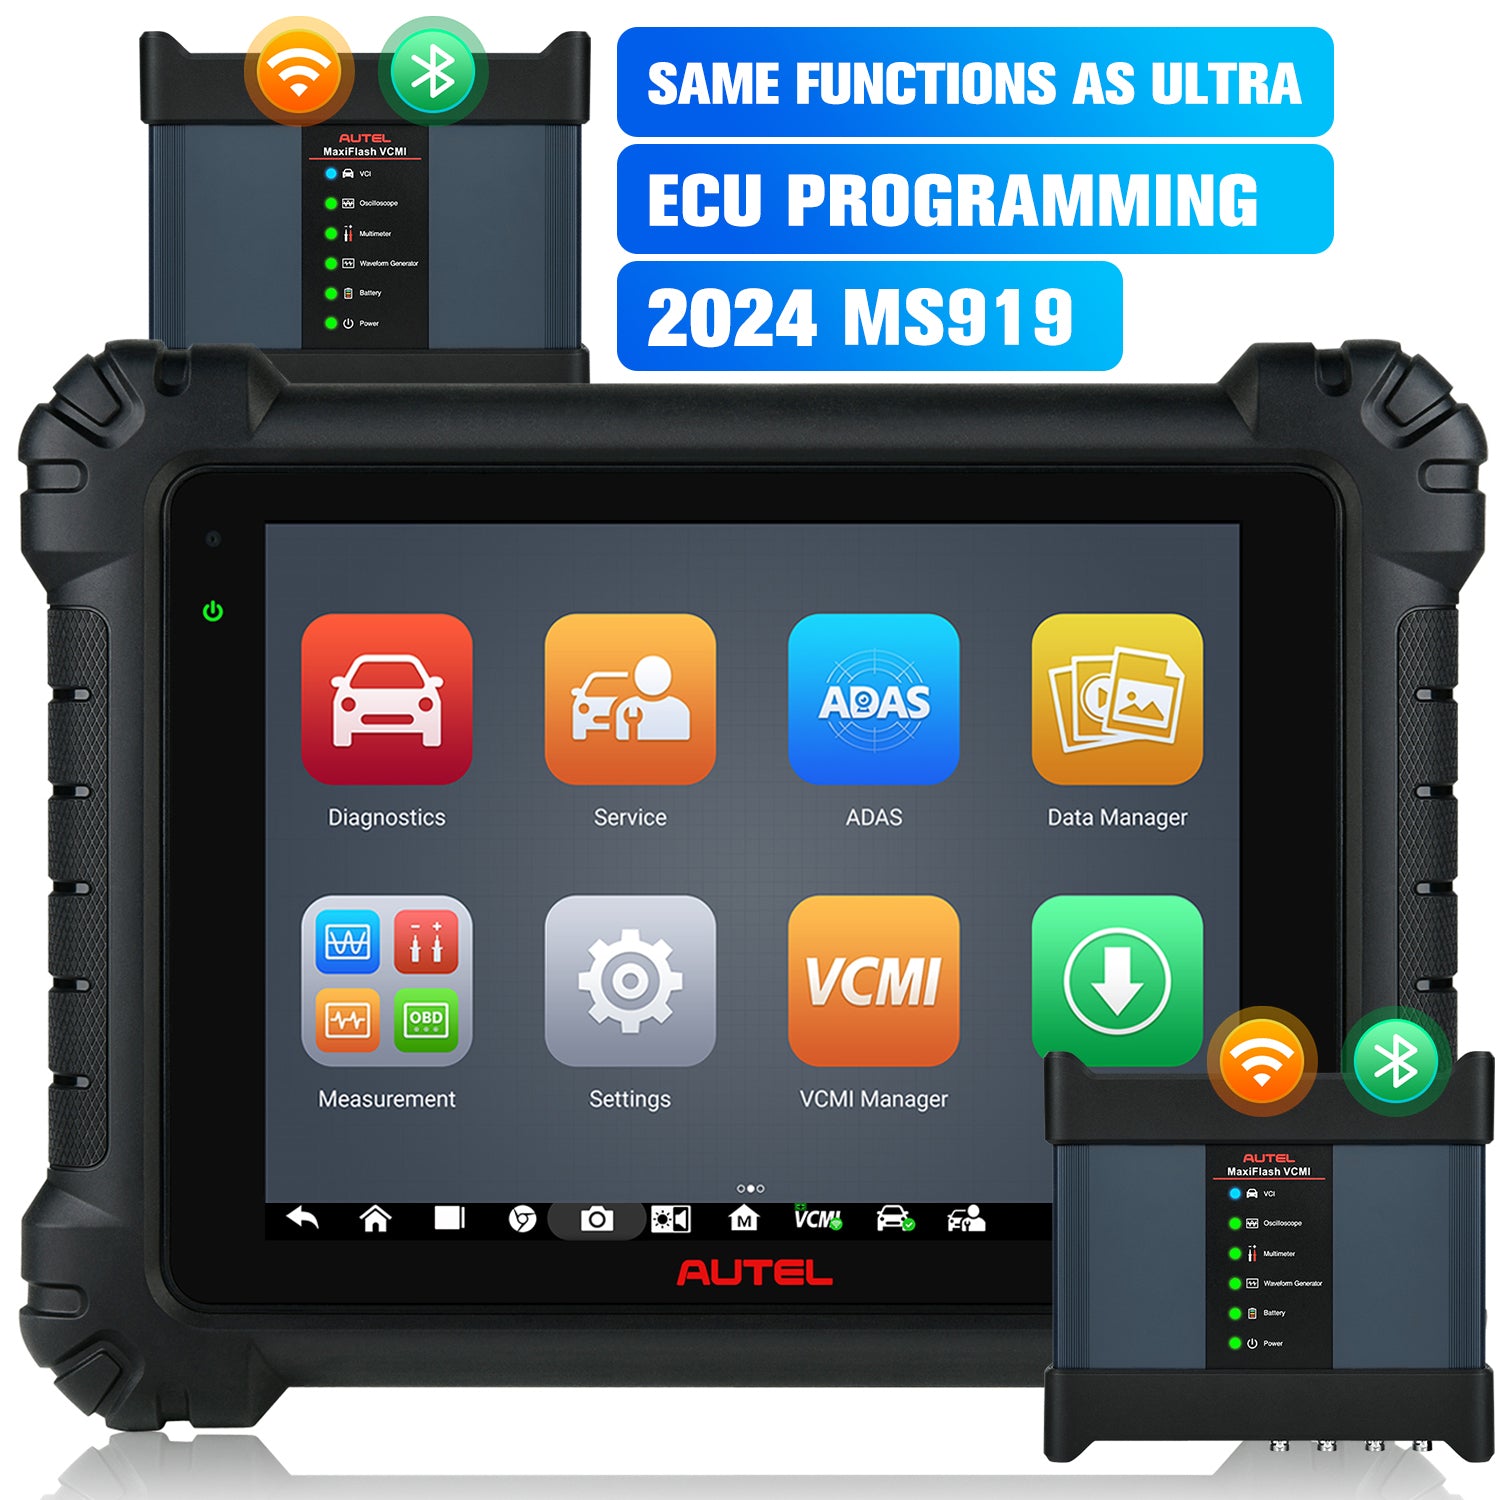 Autel Maxisys MS919 same functions as ultra